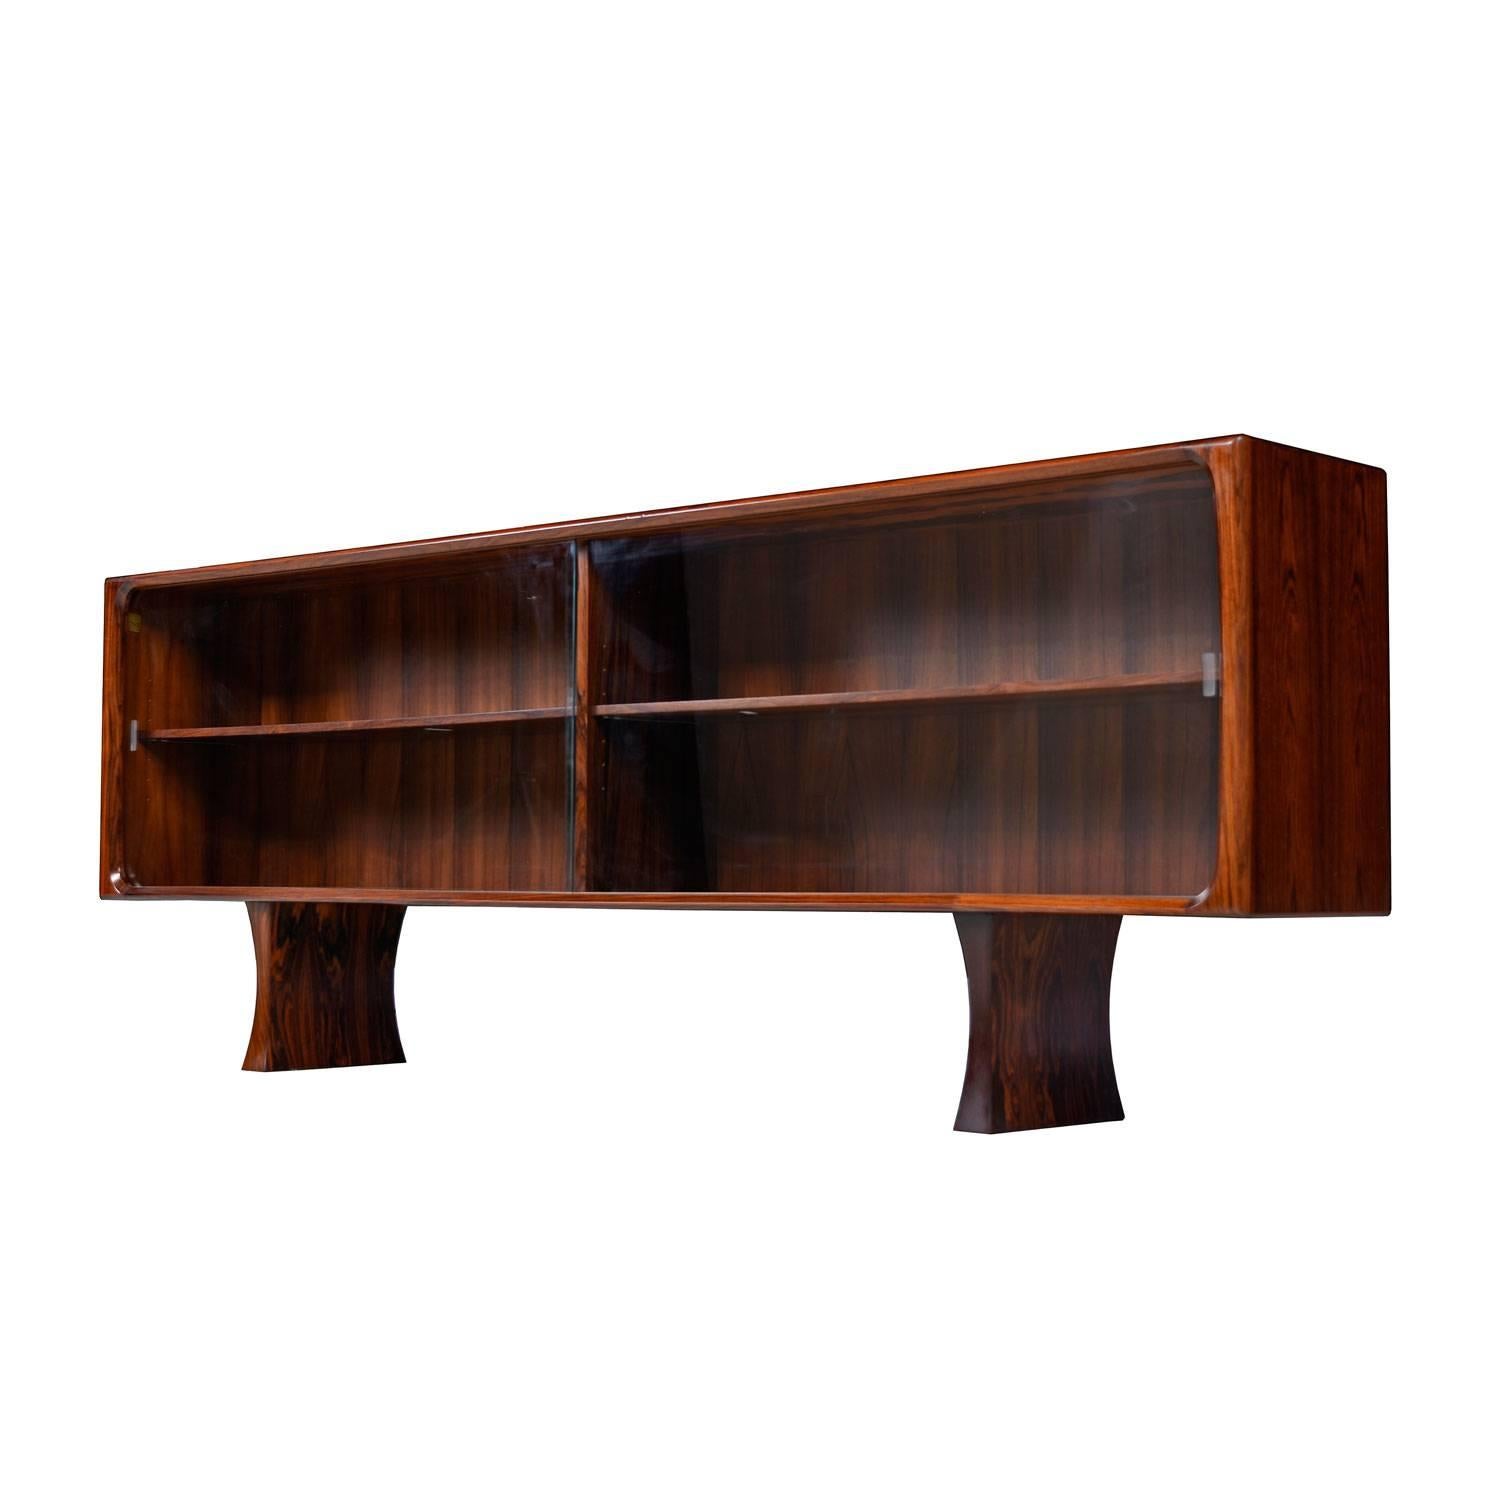 Mid-Century Modern low profile Danish rosewood bookcase by Bernhard Pedersen & Son. Exceptional quality construction. Elegantly contoured solid rosewood banding enhances the perimeters. Two bay design with a single adjustable height shelf on each